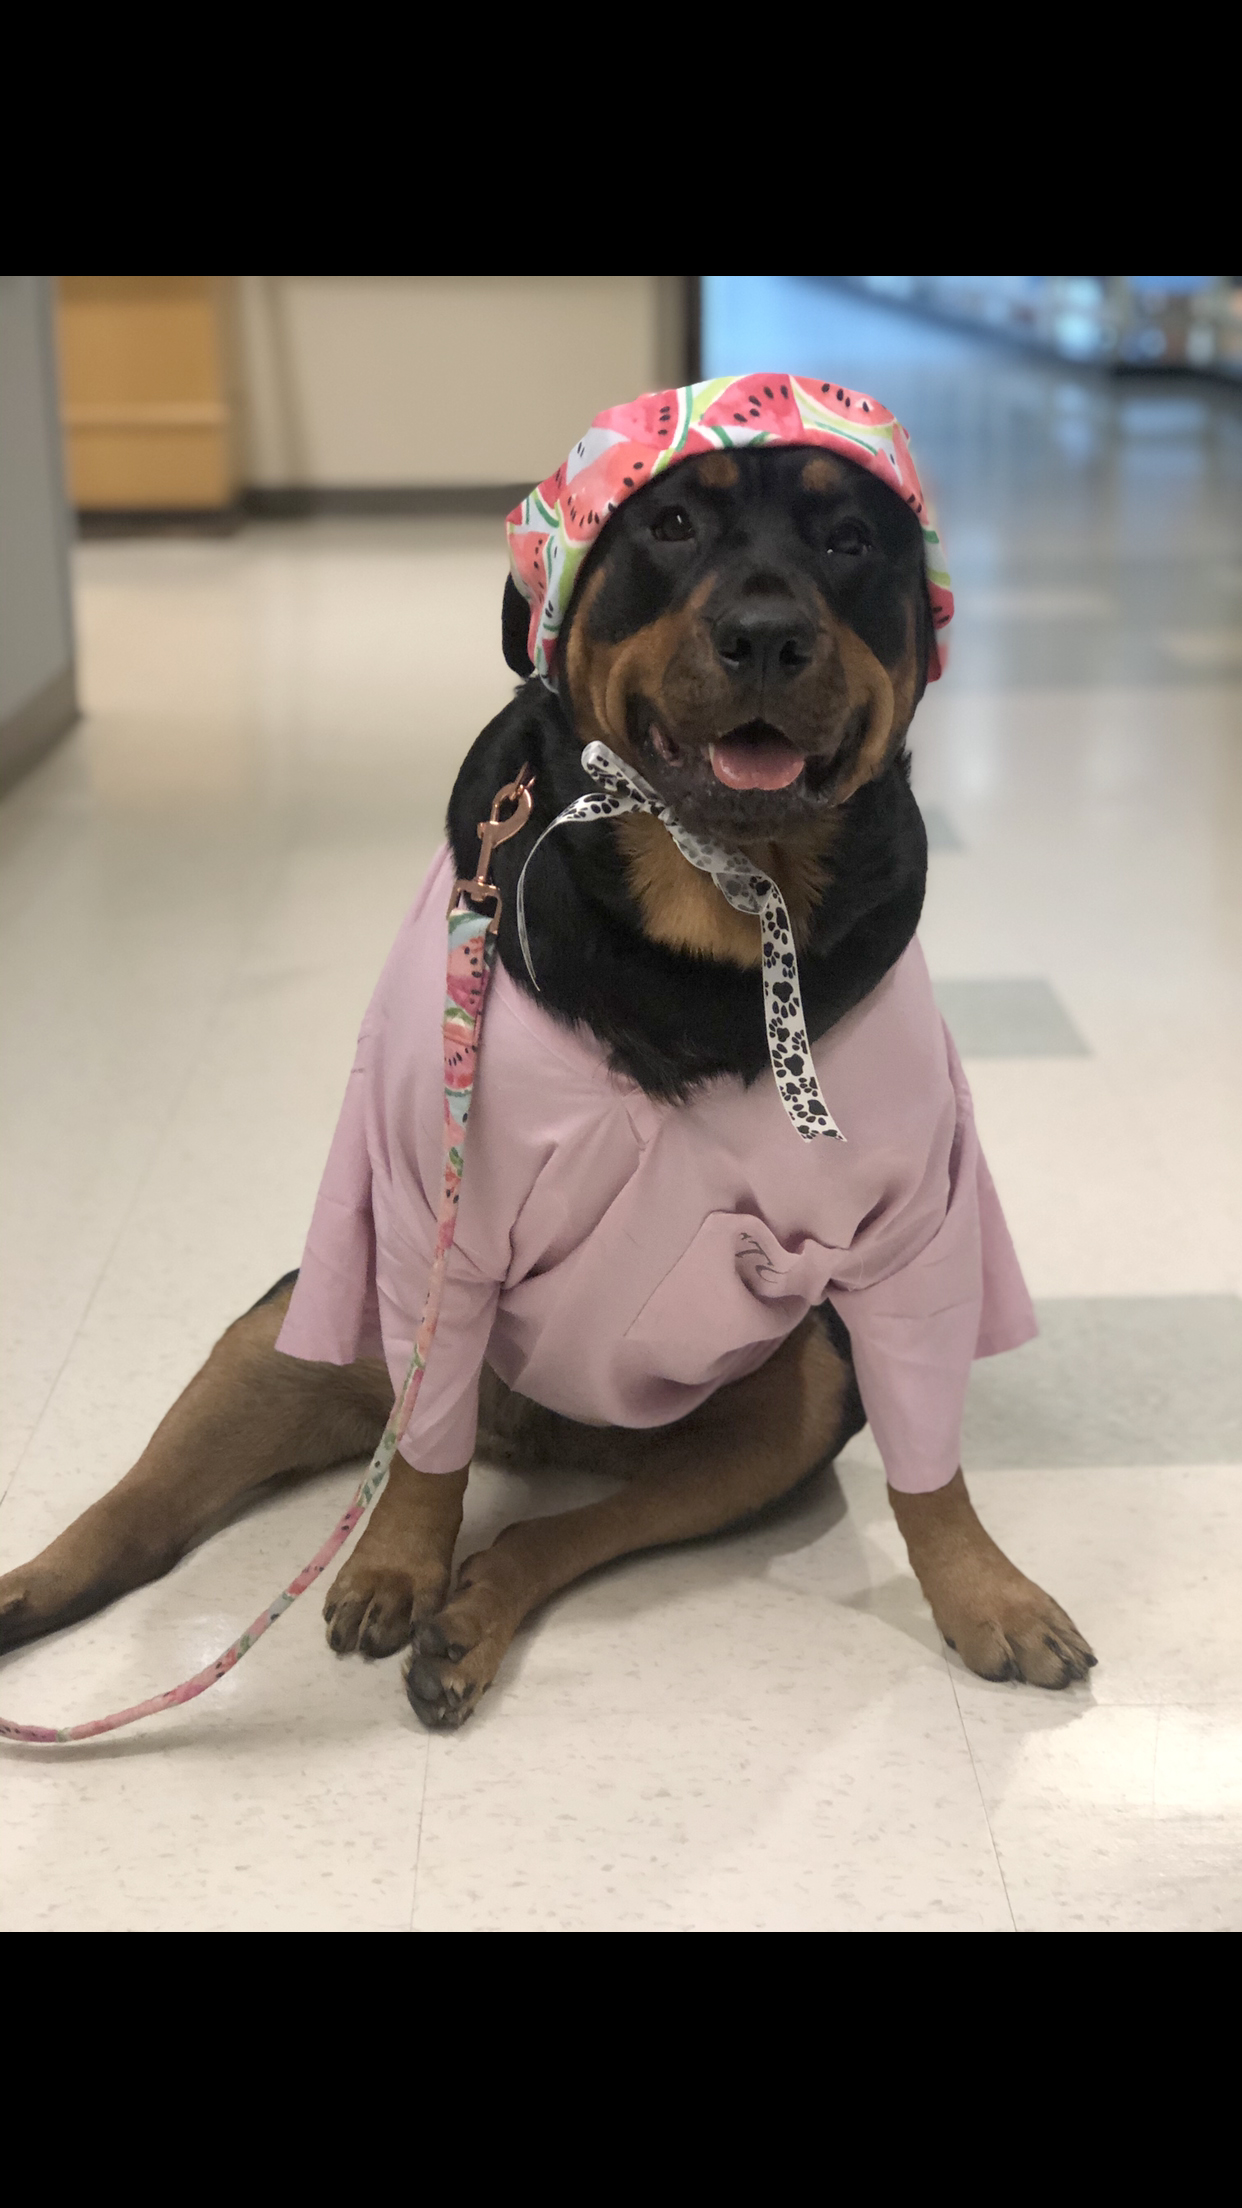 PHOTO: Rottweiler therapy dog named Loki, poses for a photo in medical attire.